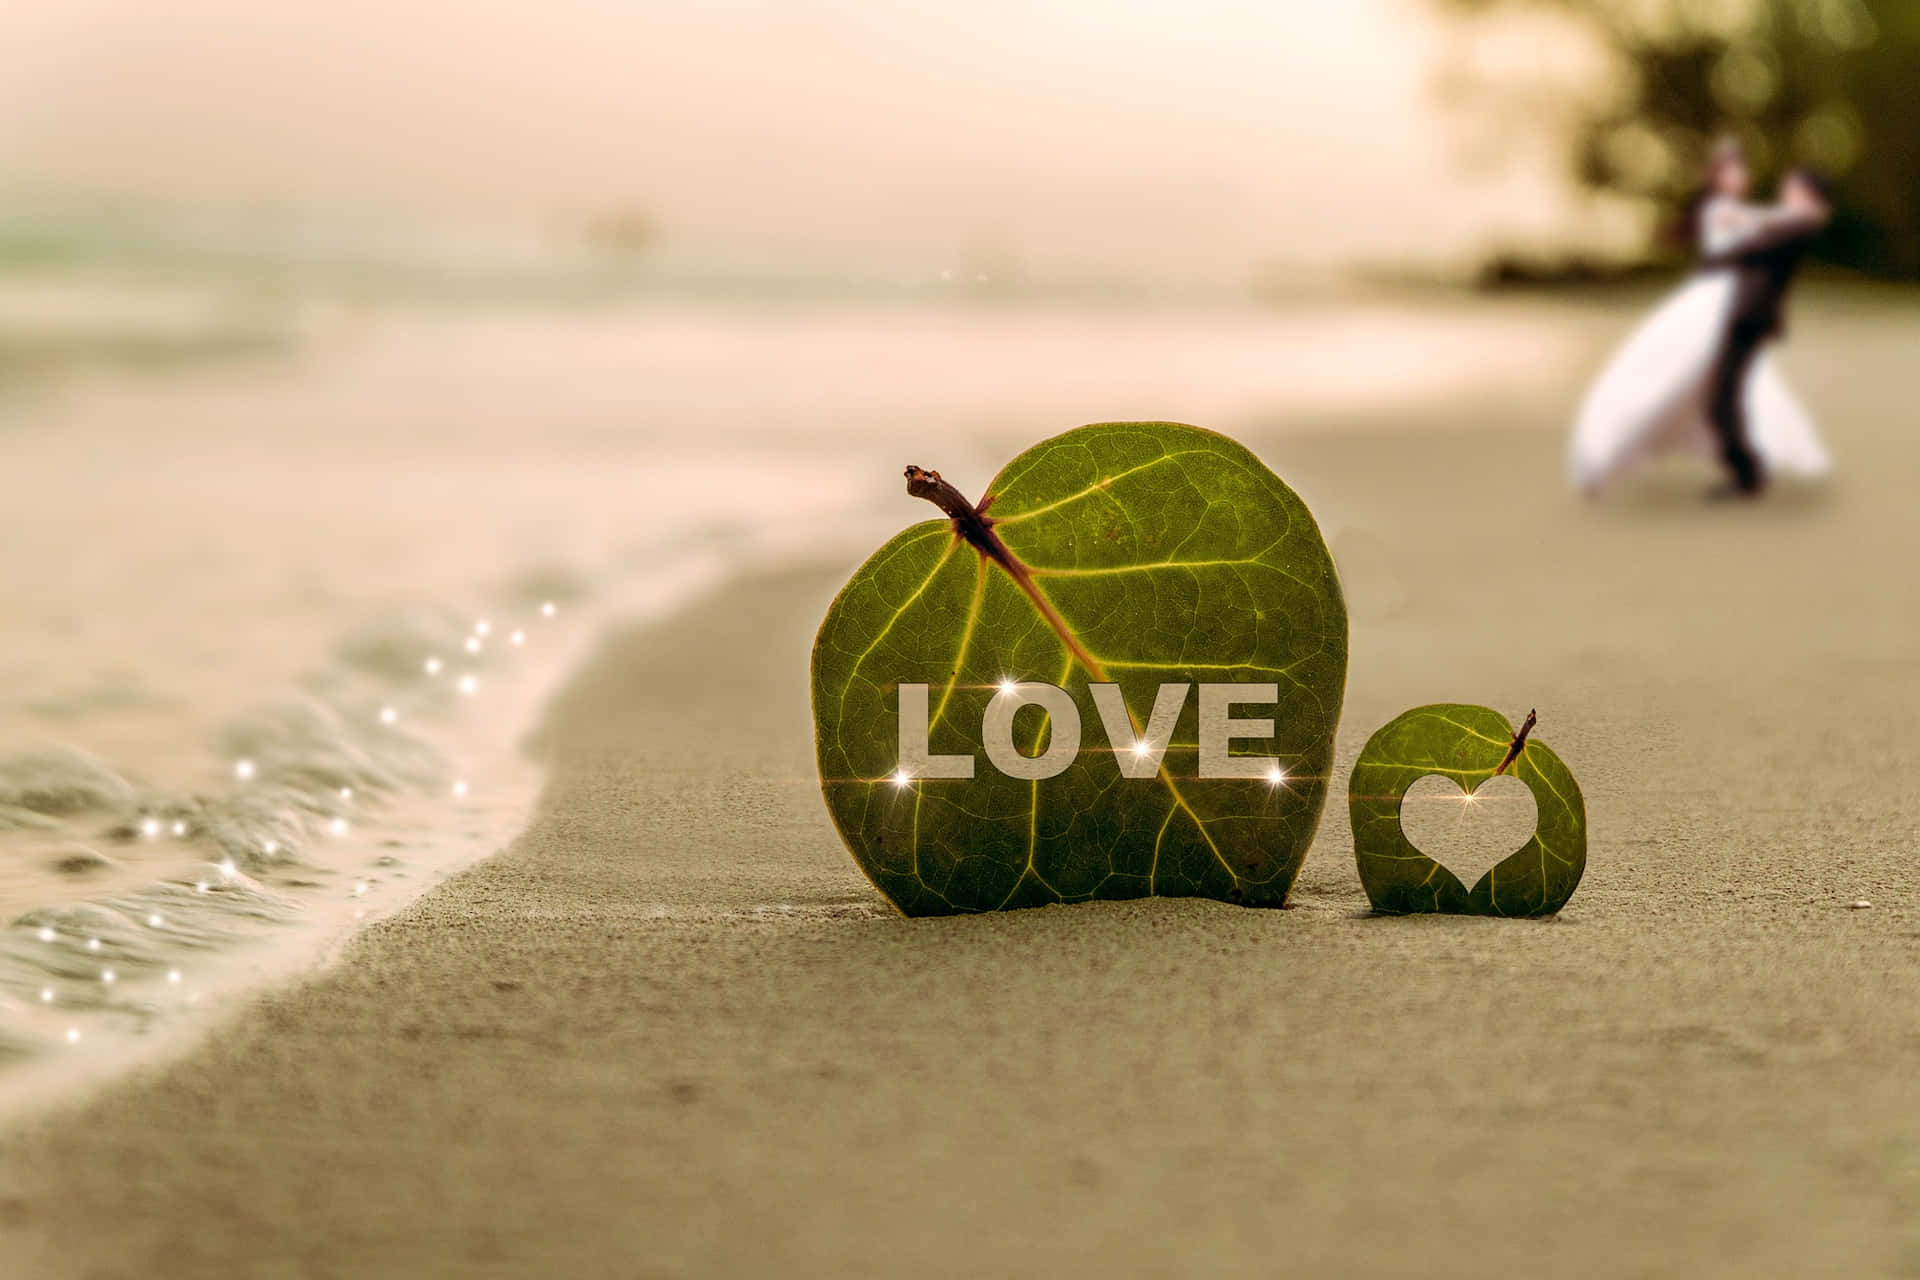 Download Love on the Beach at Sunset Wallpaper | Wallpapers.com